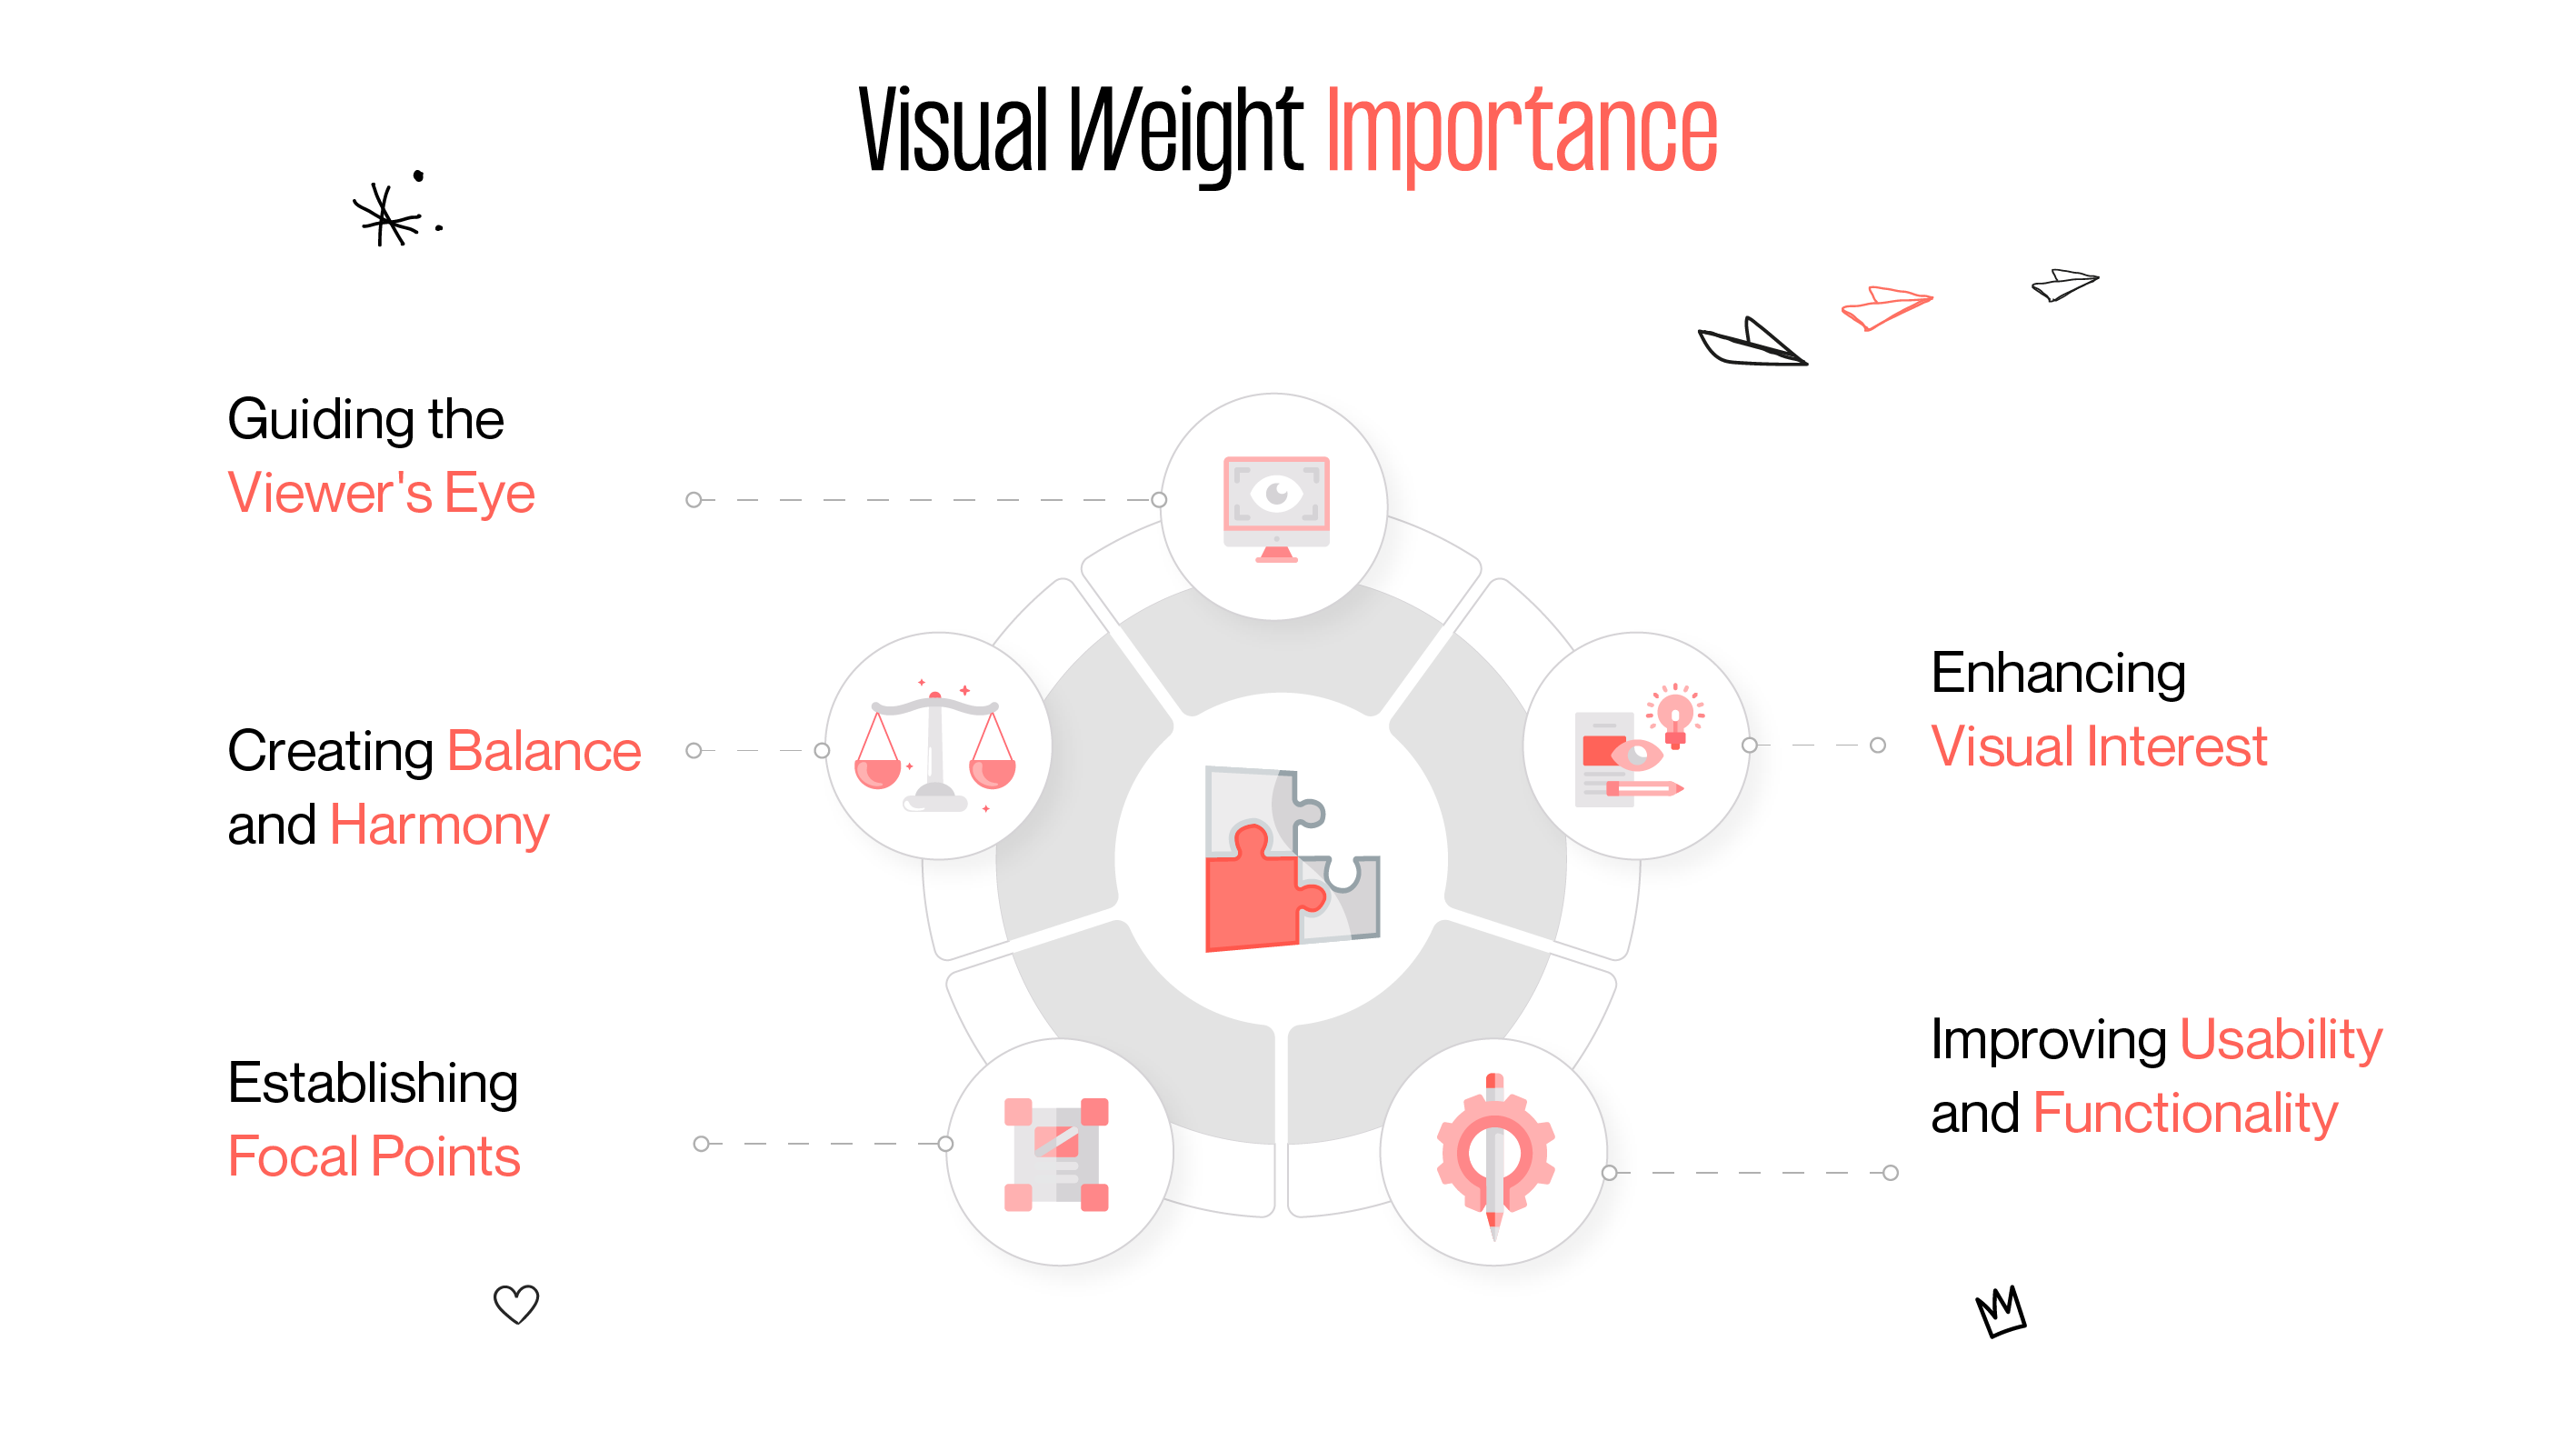 Visual Weight Importance